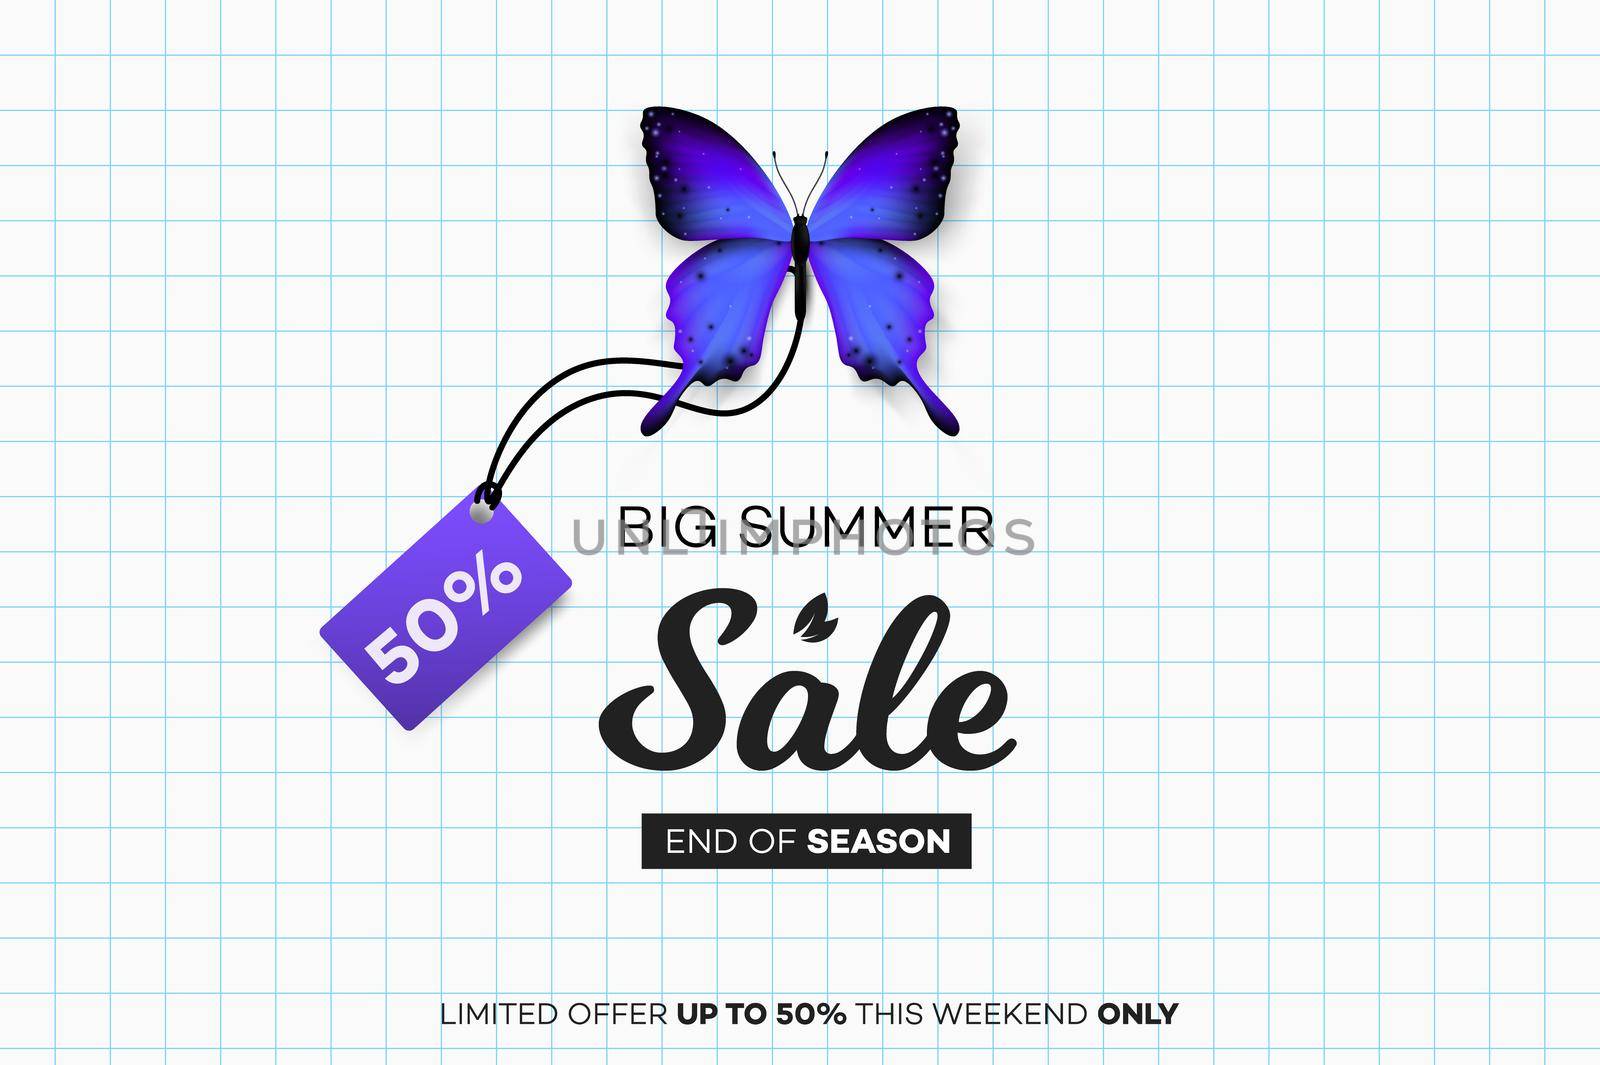 Final Summer Sale. Blue Butterfly With Sale Tag Over Notebook Sheet. Modern Conceptual Vector Illustration by Yarkee